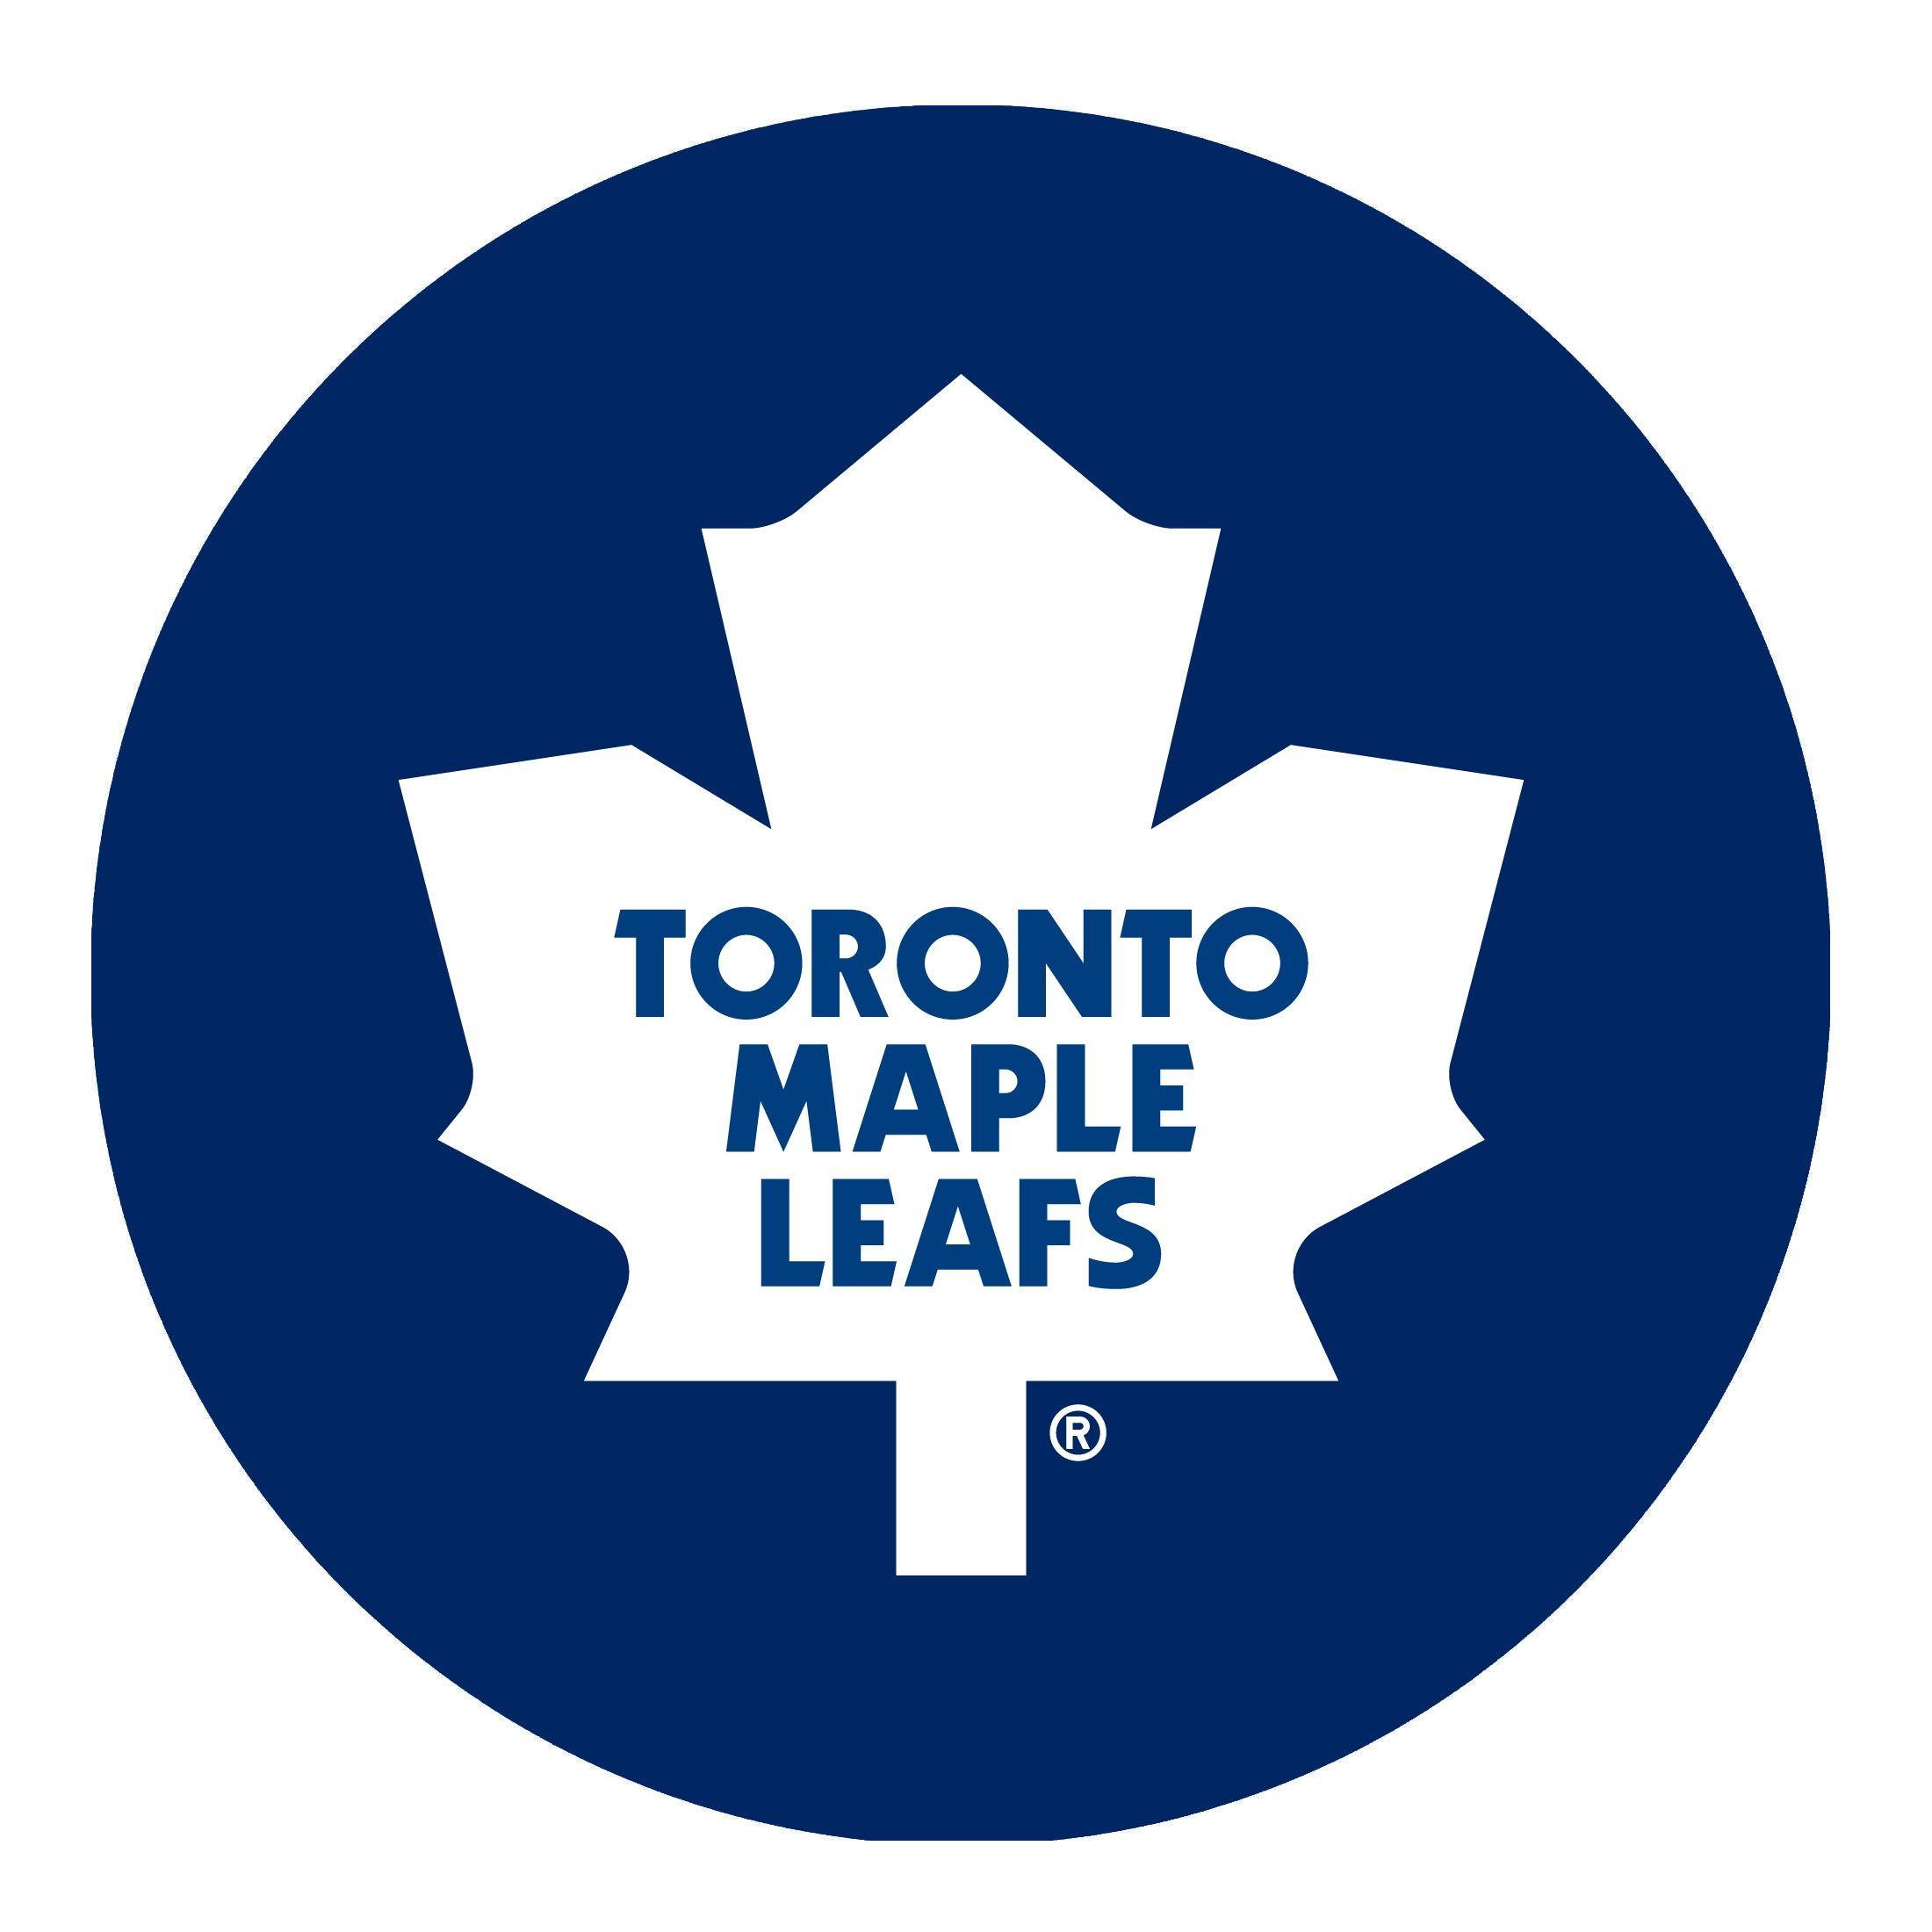 Toronto Maple Leaves Logo - The Toronto Maple Leafs | Canadiana Connection